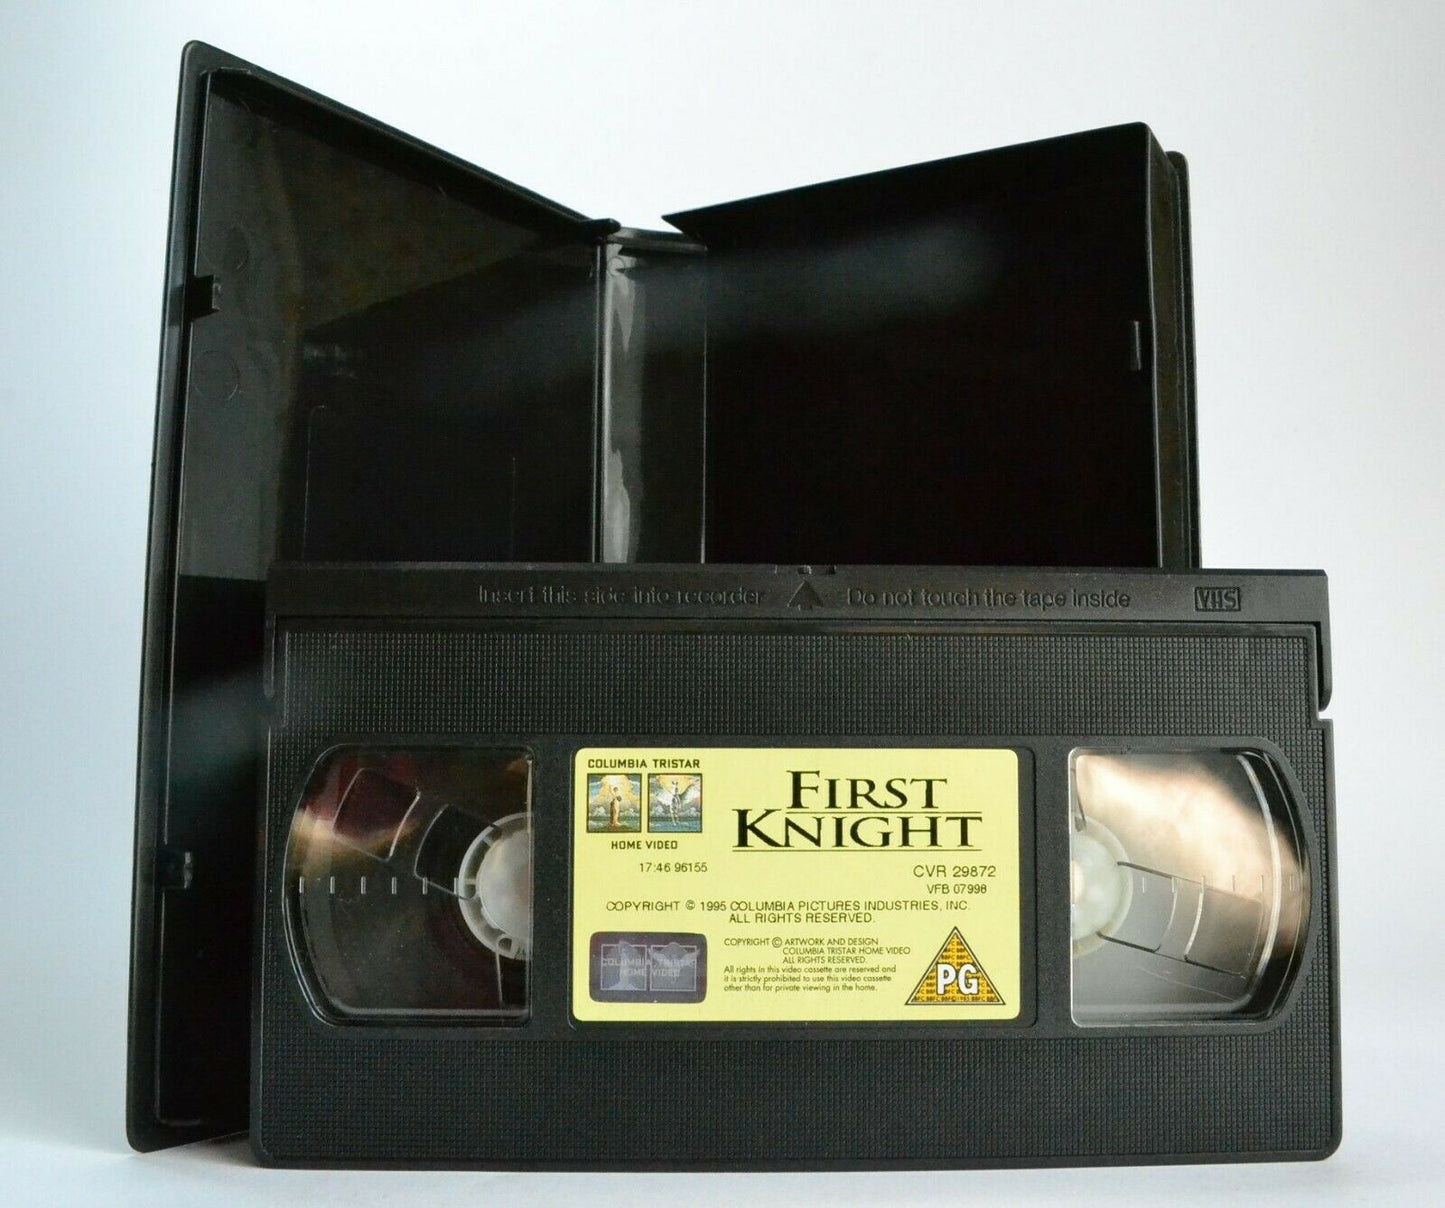 First Knight - Romantic Medieval Adventure - Sean Connery/Richard Gere - Pal VHS-